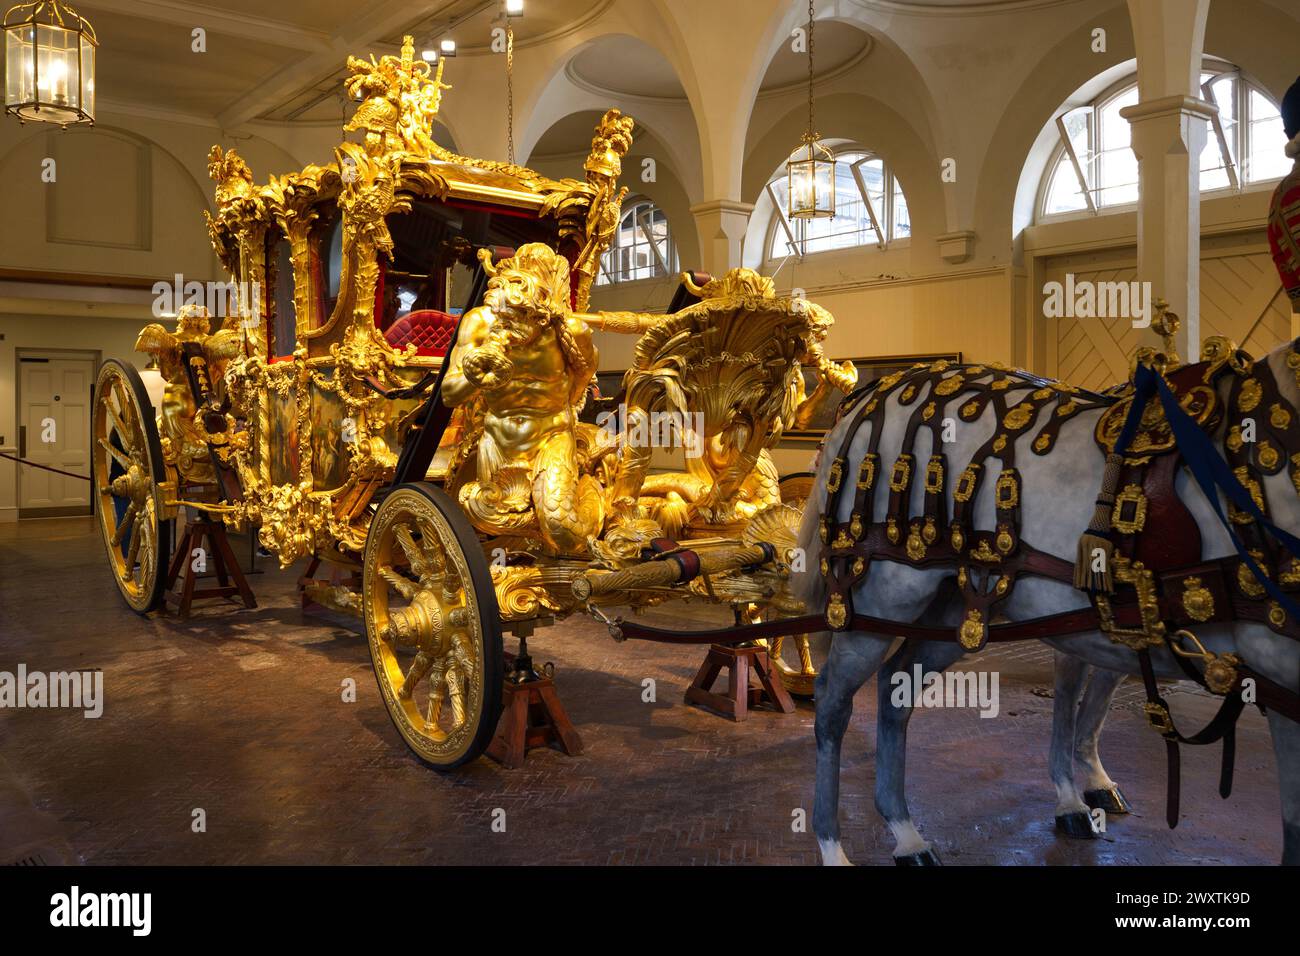 The Gold State Coach used by the British Royal Family stored in The Royal Mews Stock Photo